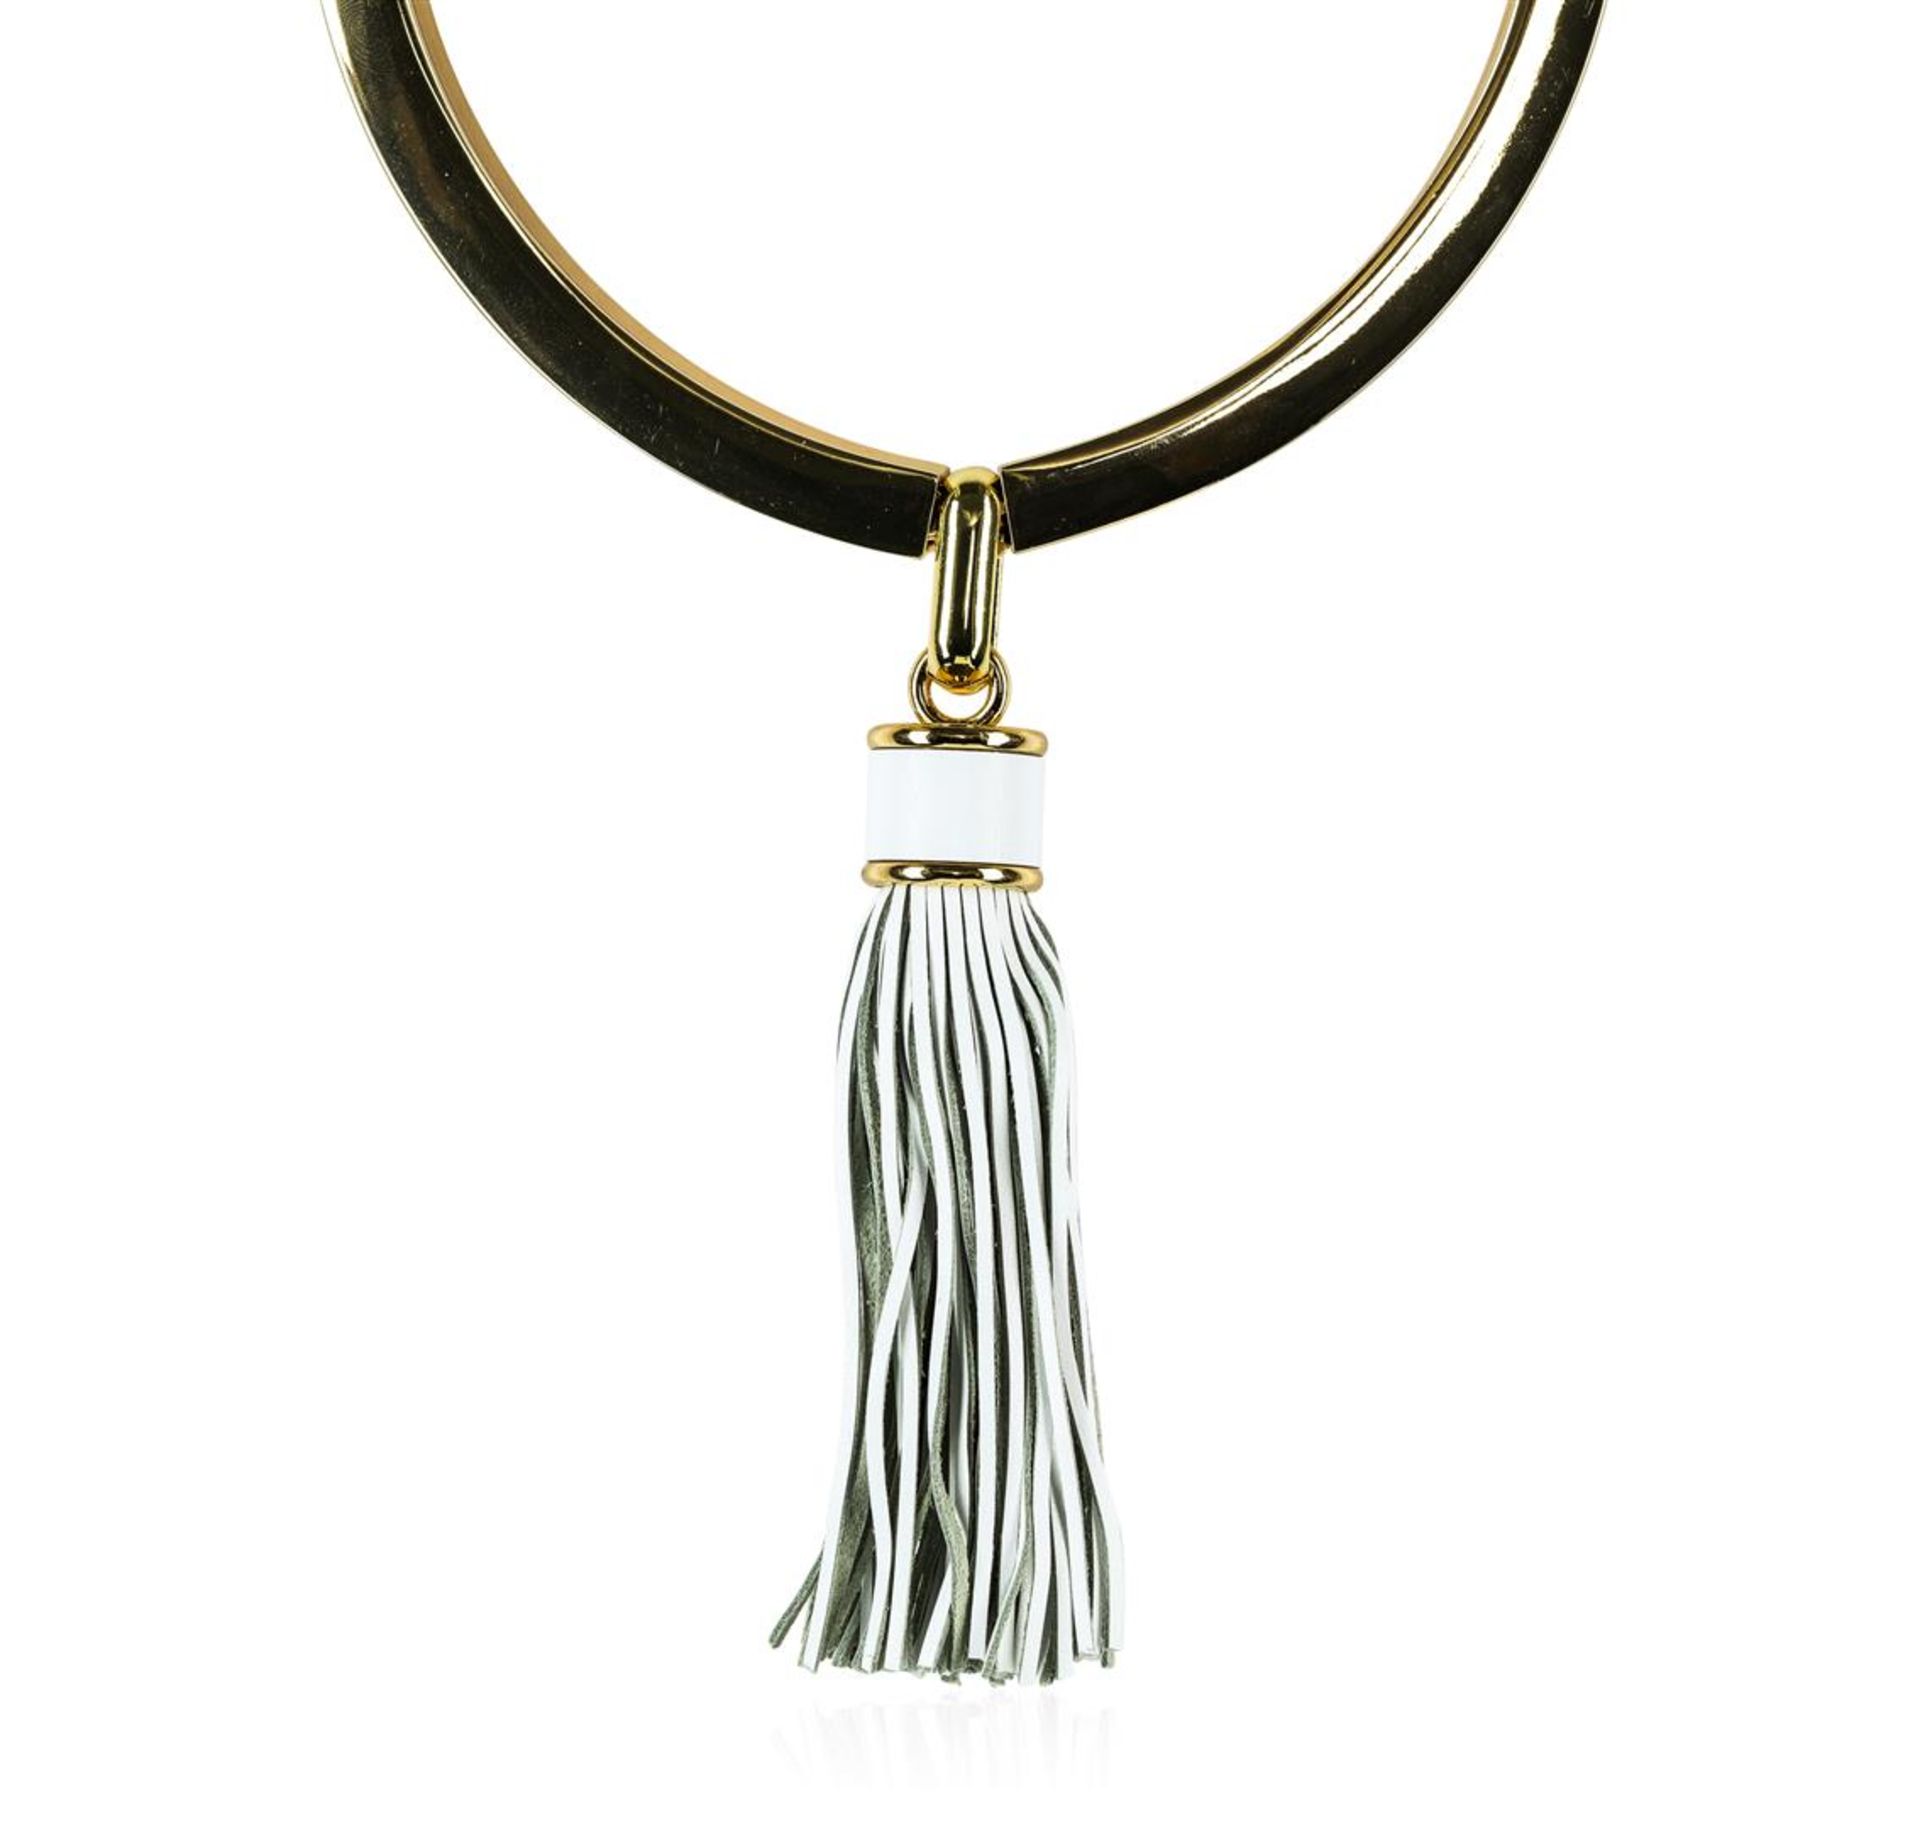 Leather Tassel Pendant Necklace - Rhodium Plated - Image 2 of 2